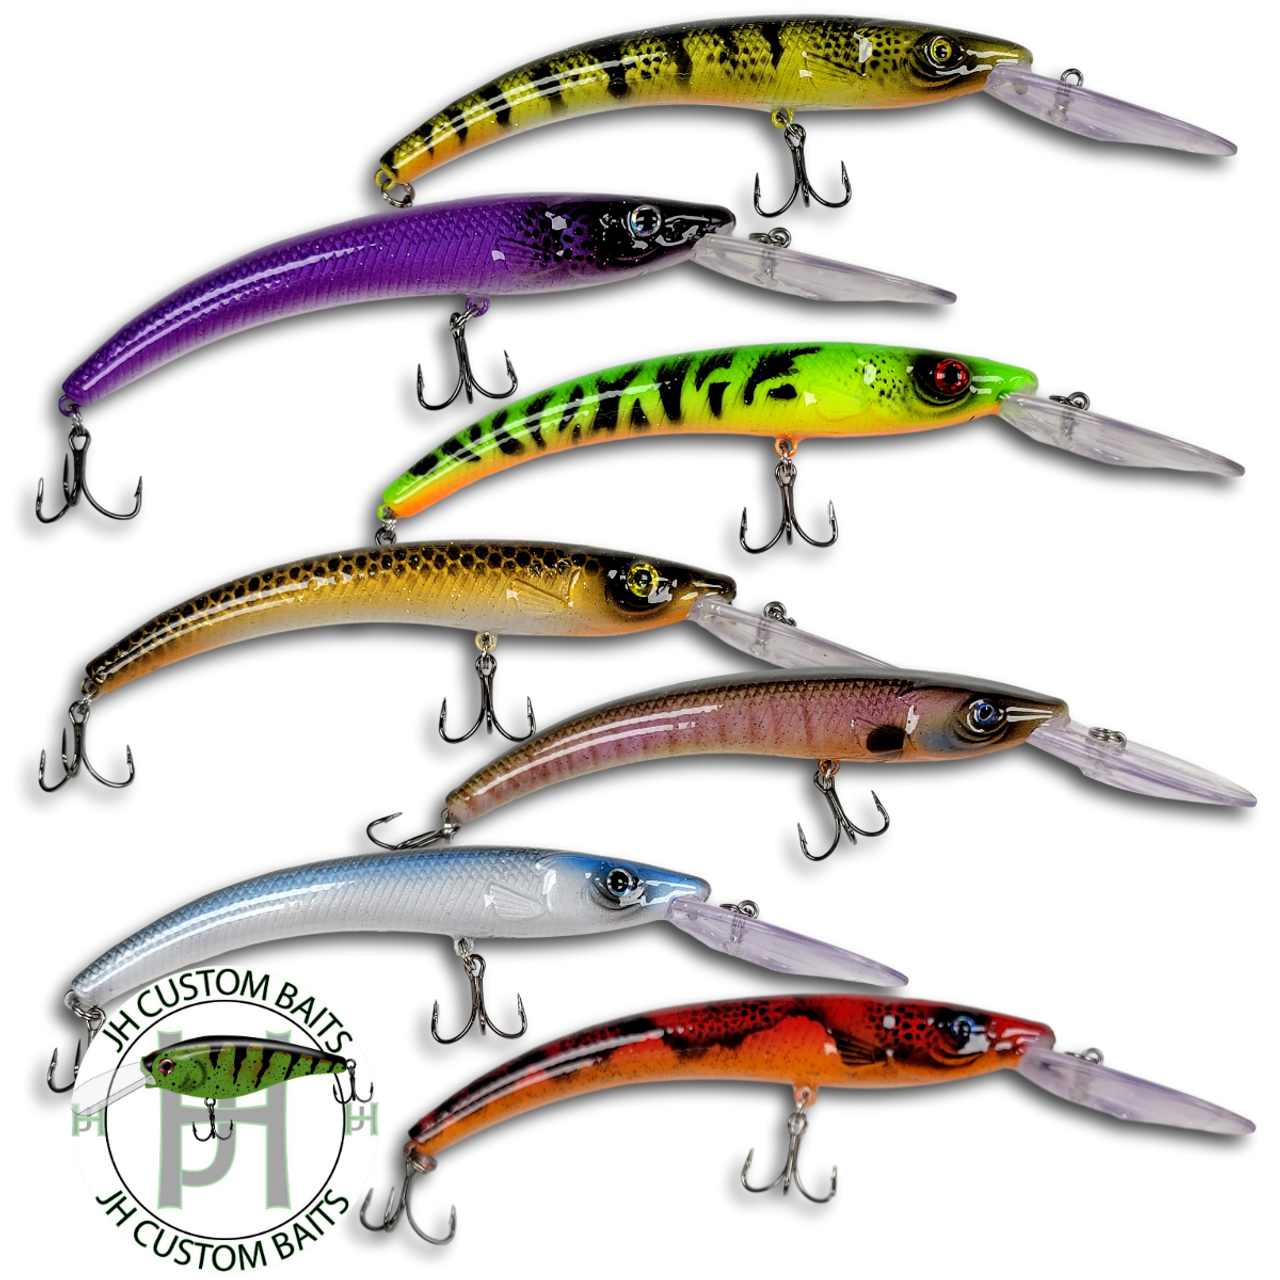 JH Custom Baits 4.75 Skinny Minnow - Hand Painted Finesse Lures for  Tactical Angling